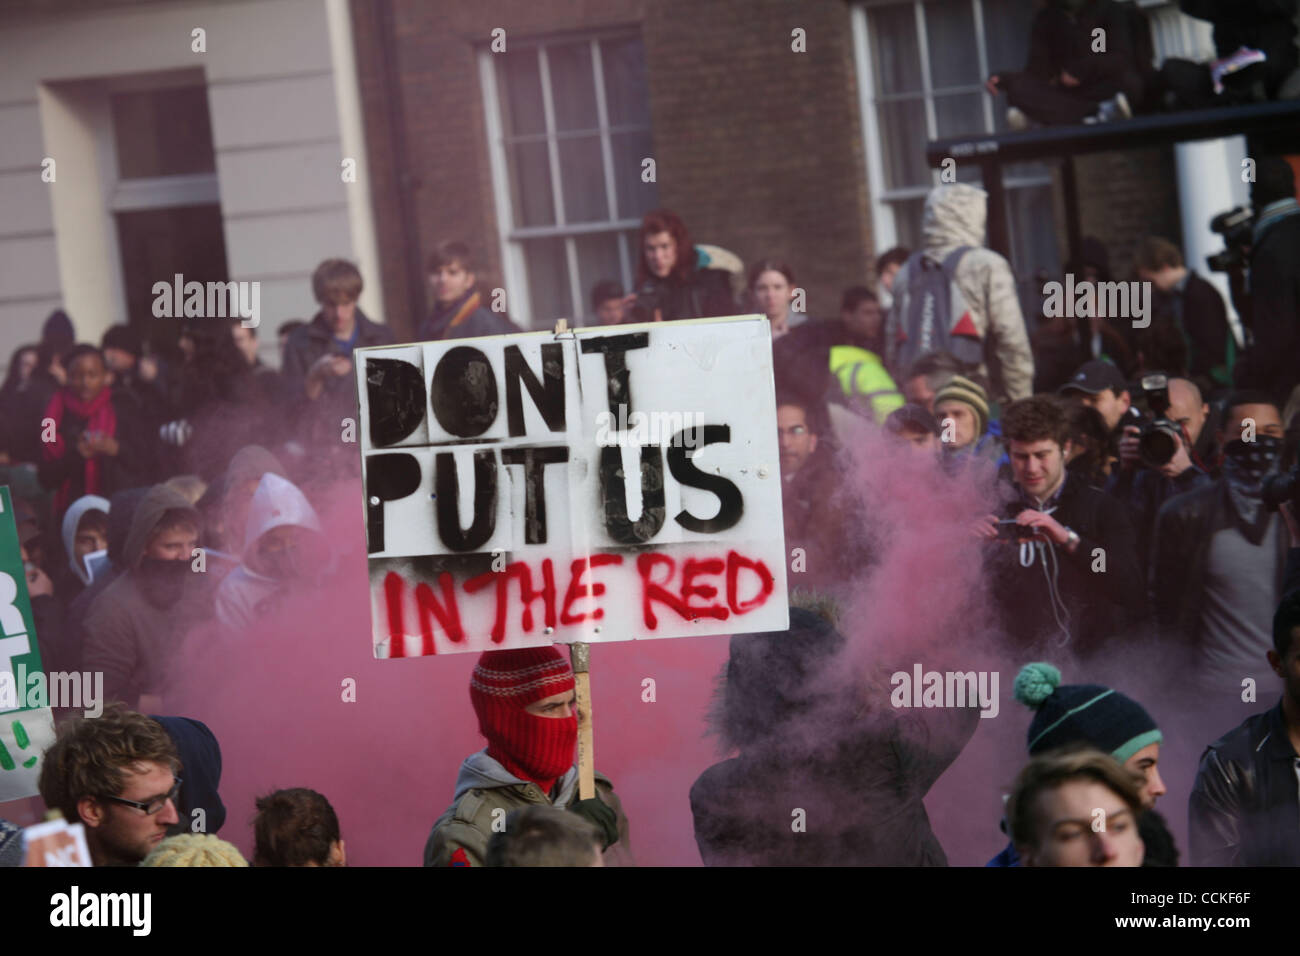 Nov 24, 2010 - London, England, United Kingdom - A student protest against tuition fees and EMA grant cuts again turned violent after police 'kettled' the protesters. Protests against planned increases in tuition fees and maintenance grant cuts. This is the second student day of action and a student Stock Photo